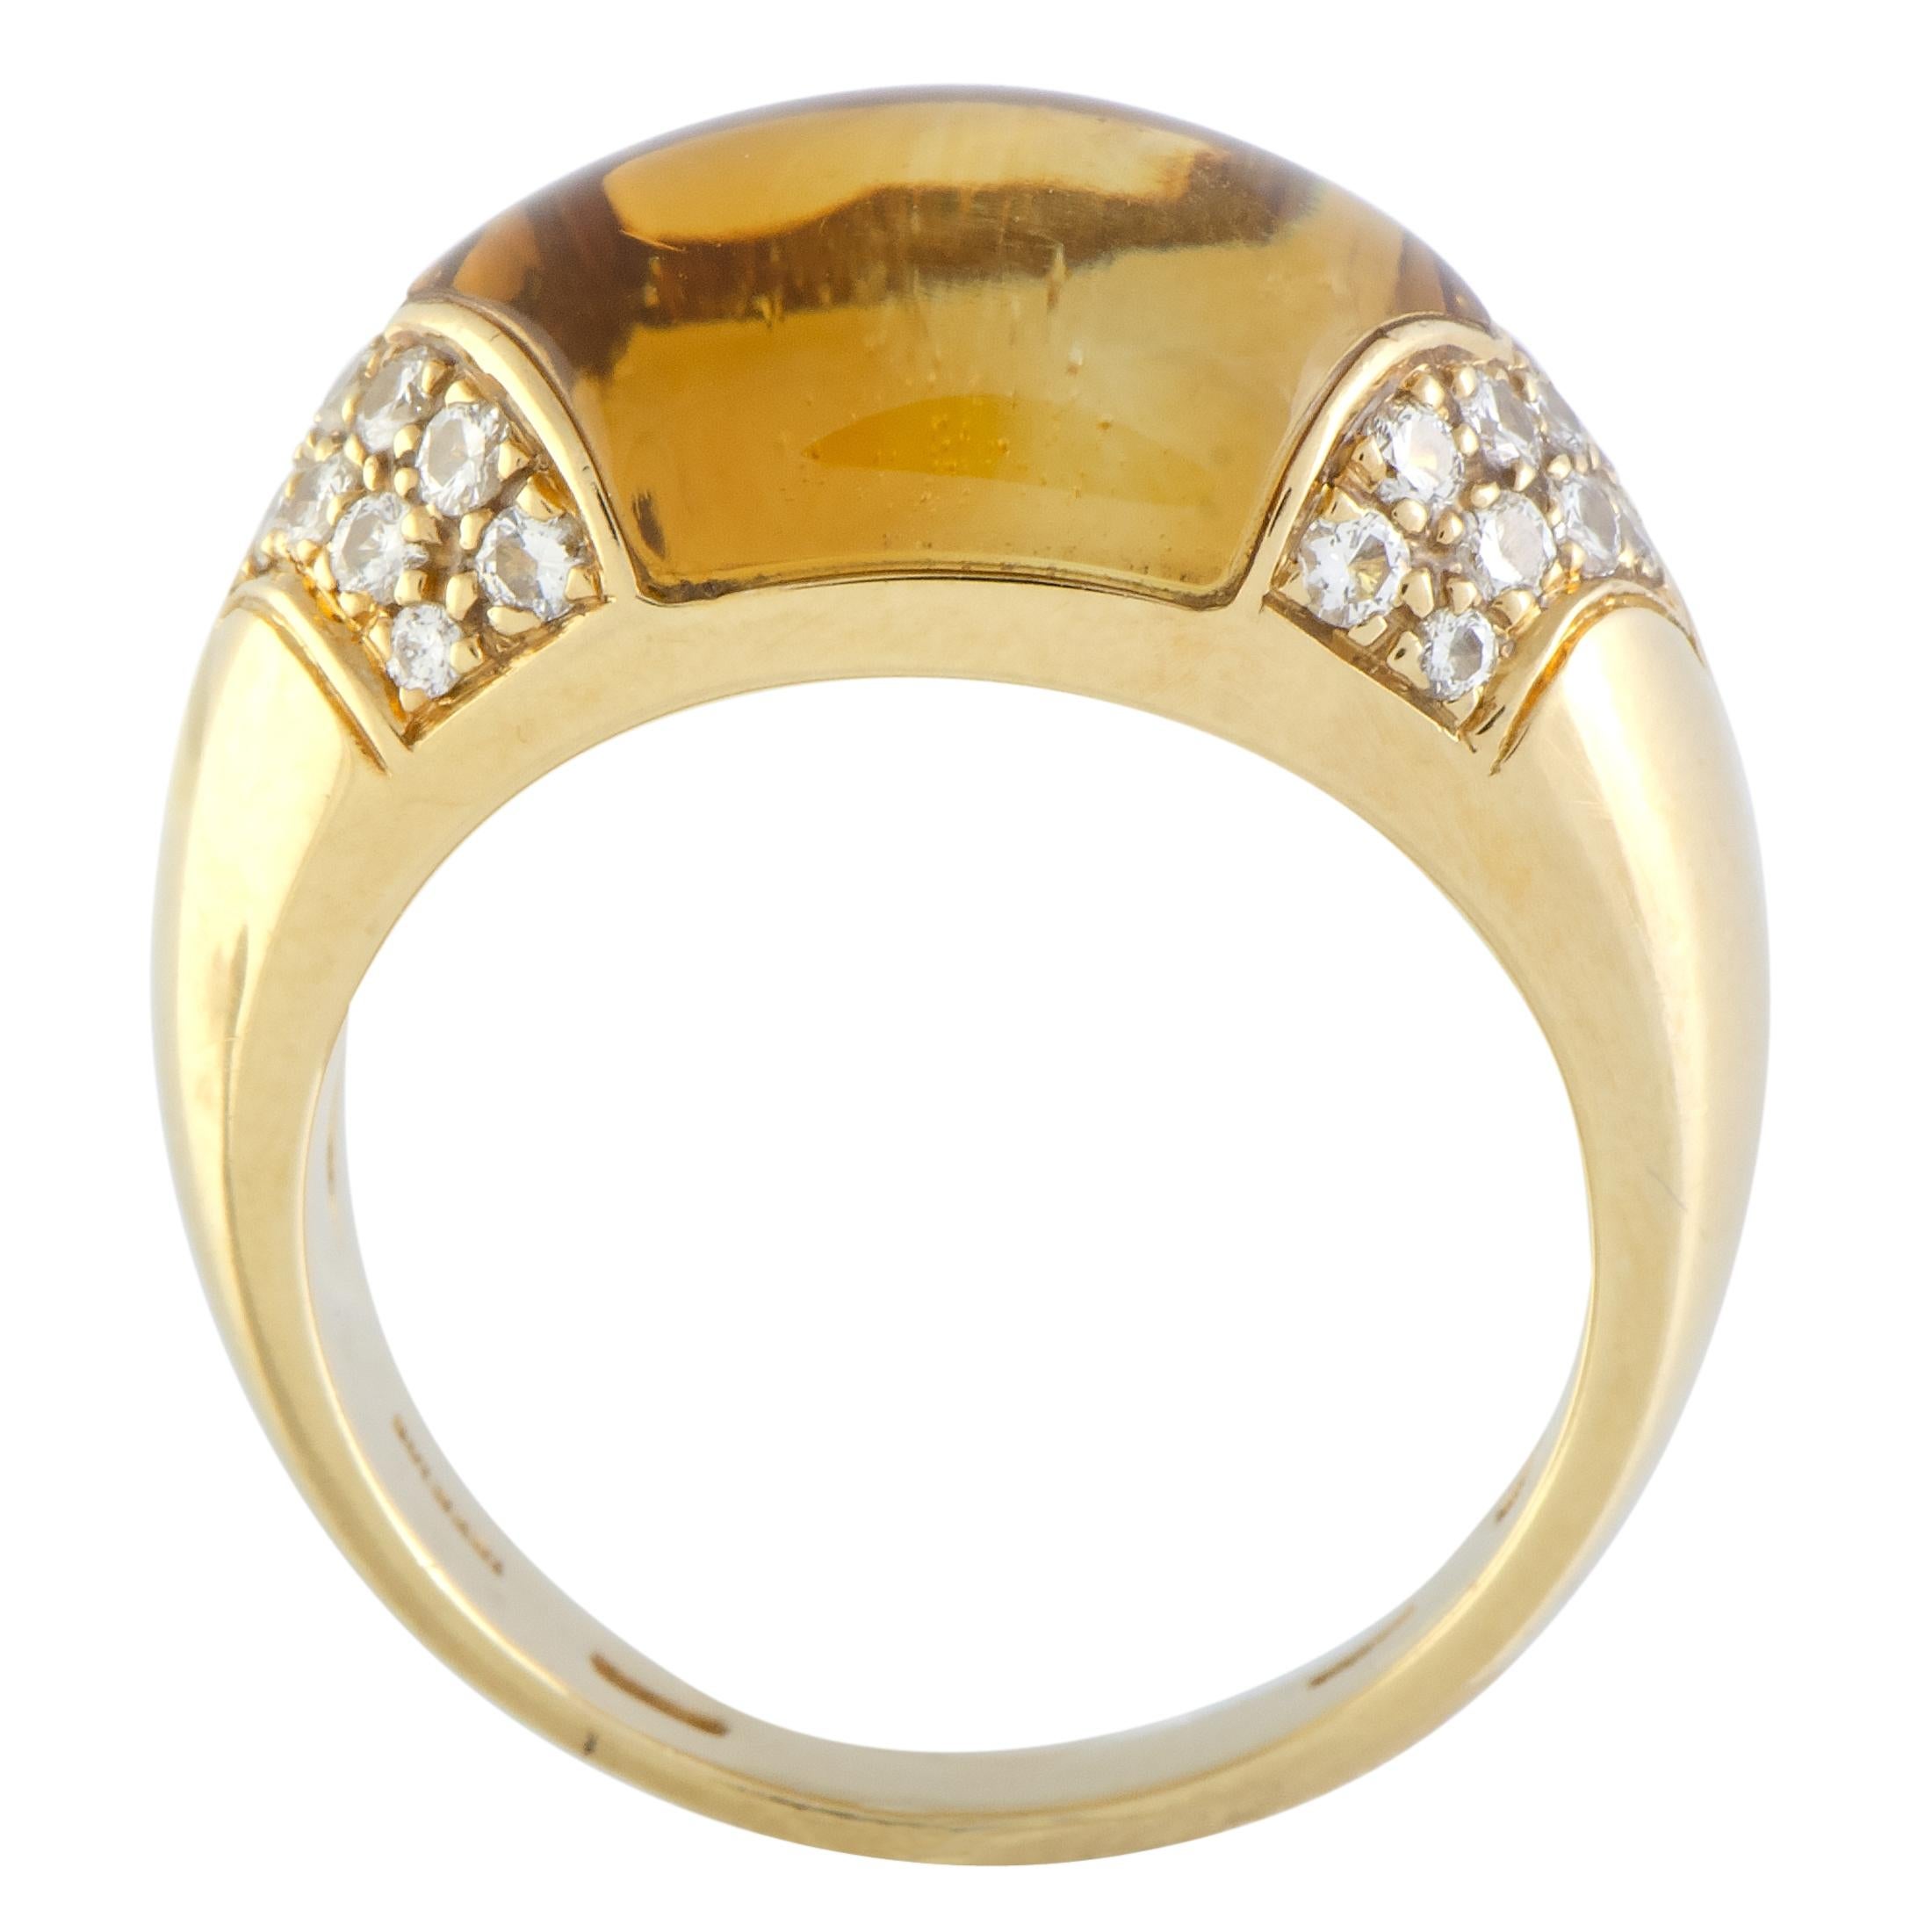 Gently immersed into the radiant 18K yellow gold in order to fit seamlessly into the perfectly smooth shape, the marvelous citrine stone also provides irresistible color in this stunning ring from Bvlgari which also boasts glistening diamonds for a